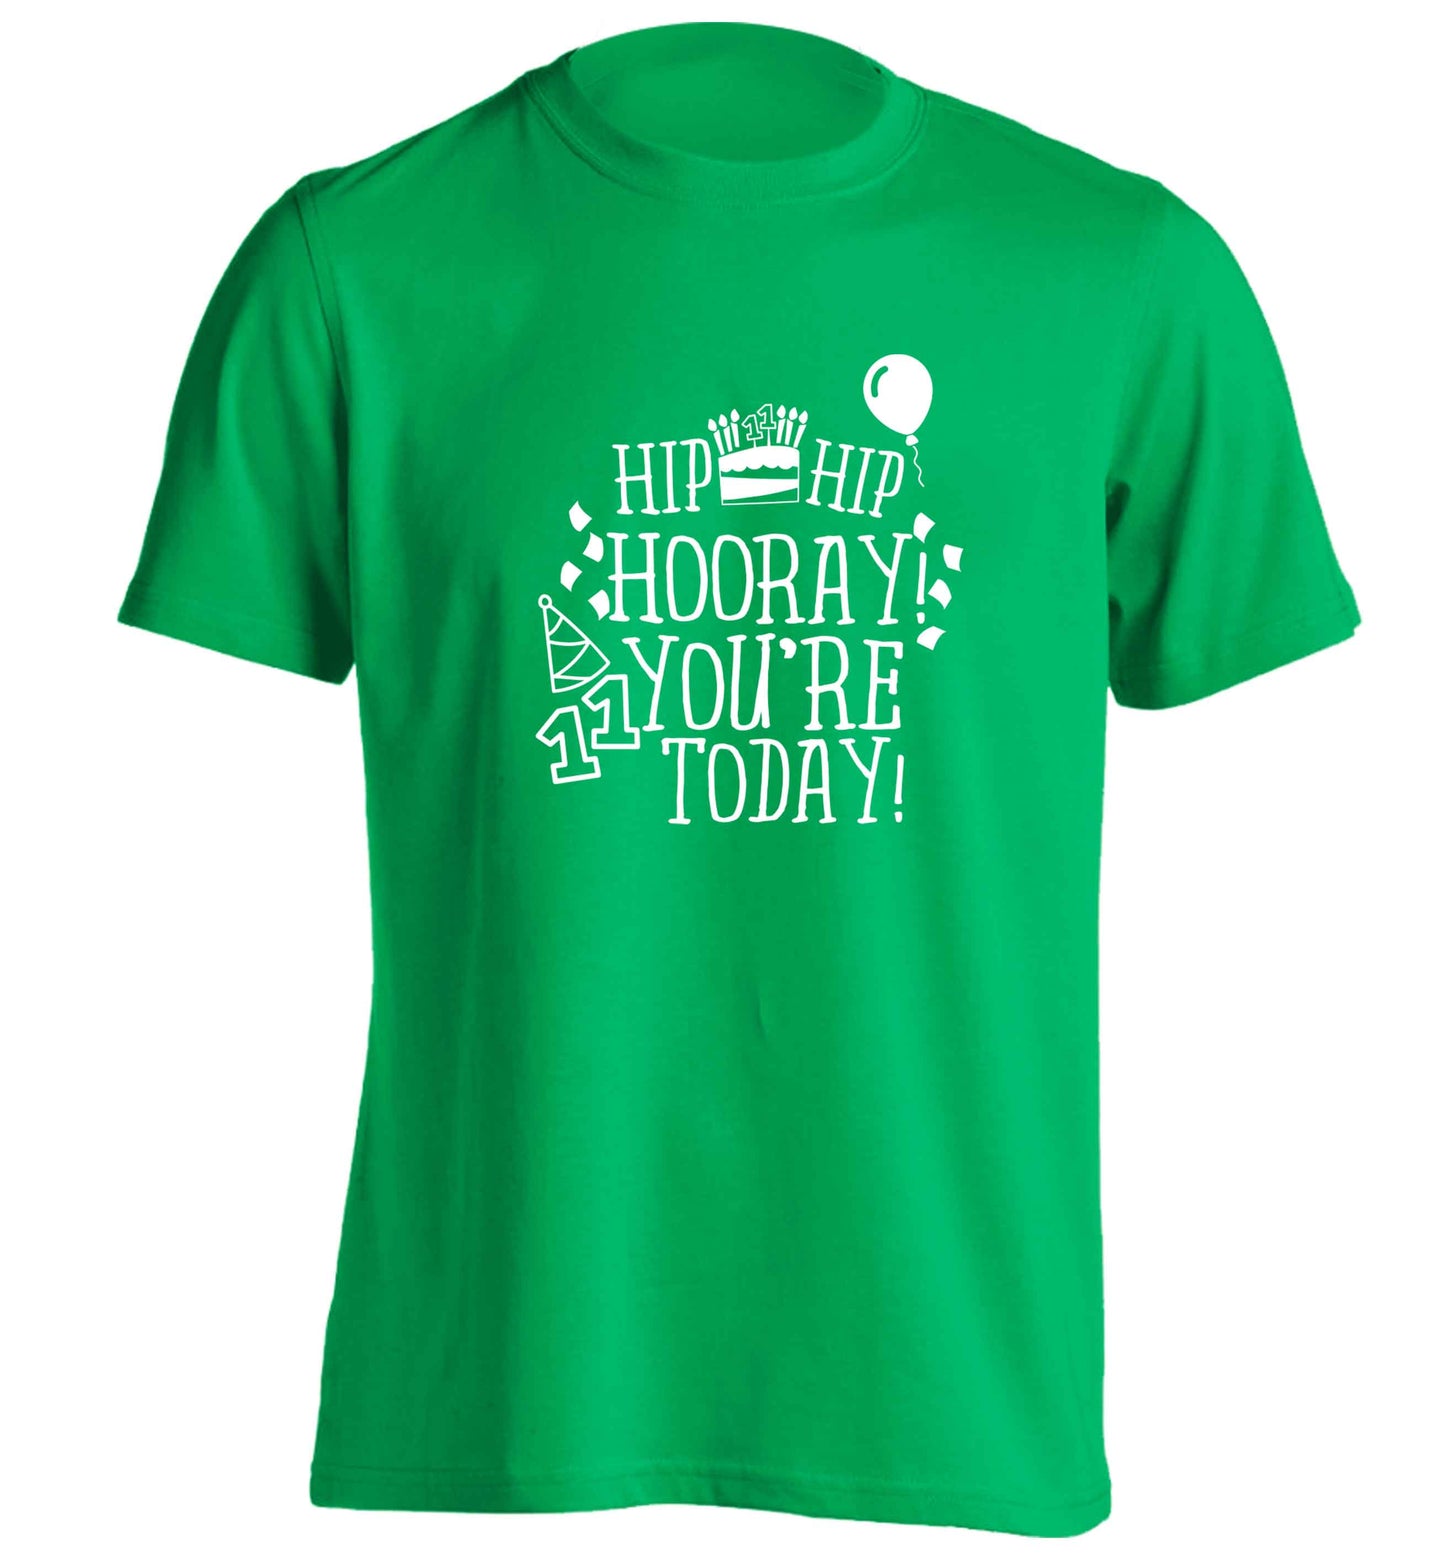 Hip hip hooray I you're eleven today! adults unisex green Tshirt 2XL